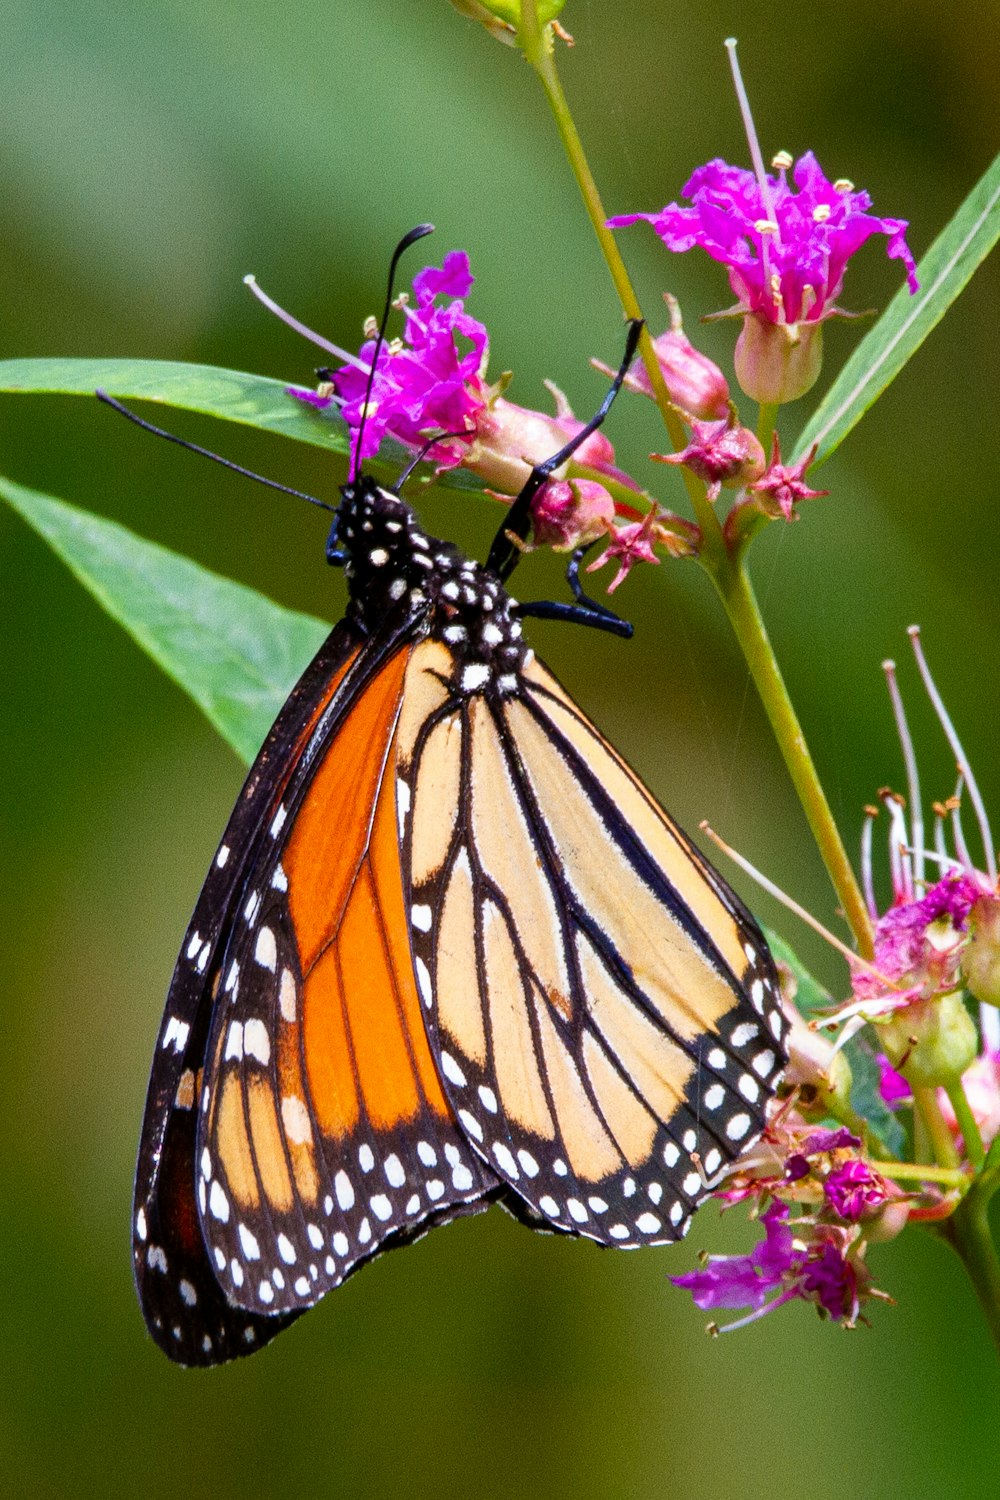 monarch butterfly perched on pink flower in close up photography during daytime